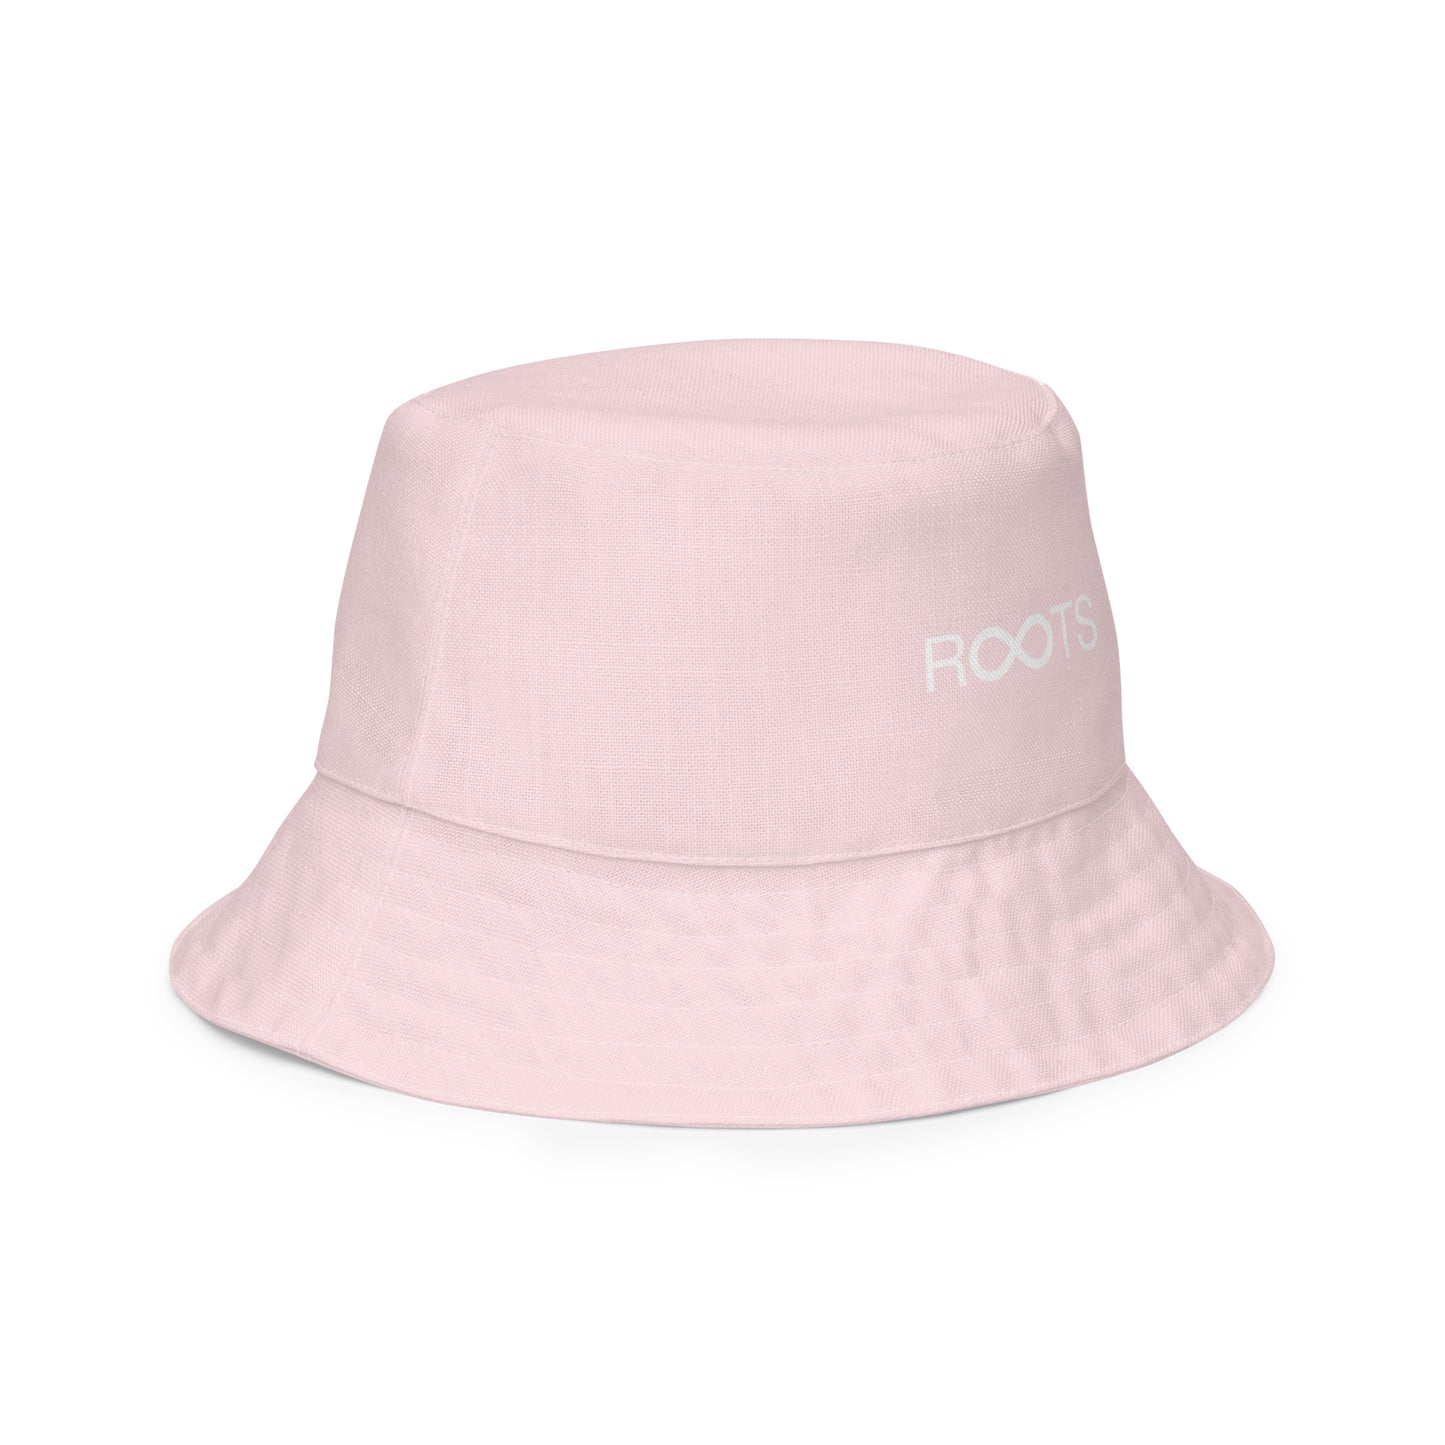 Fight Breast Cancer Reversible bucket hat